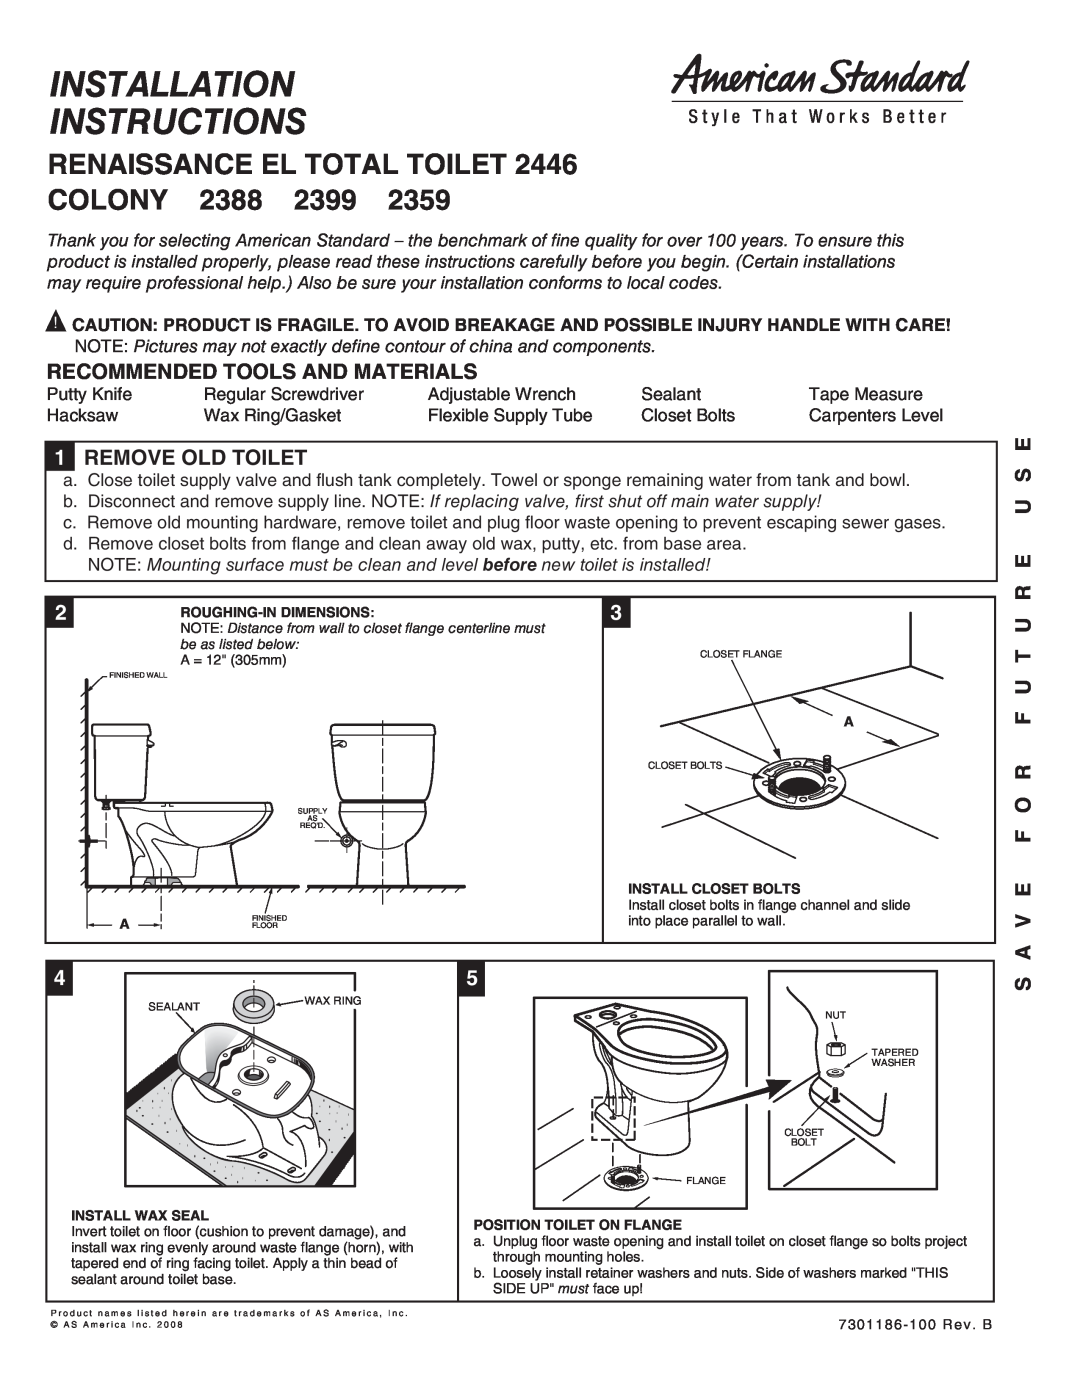 American Standard 2446 installation instructions Recommended Tools And Materials, 1REMOVE OLD TOILET 